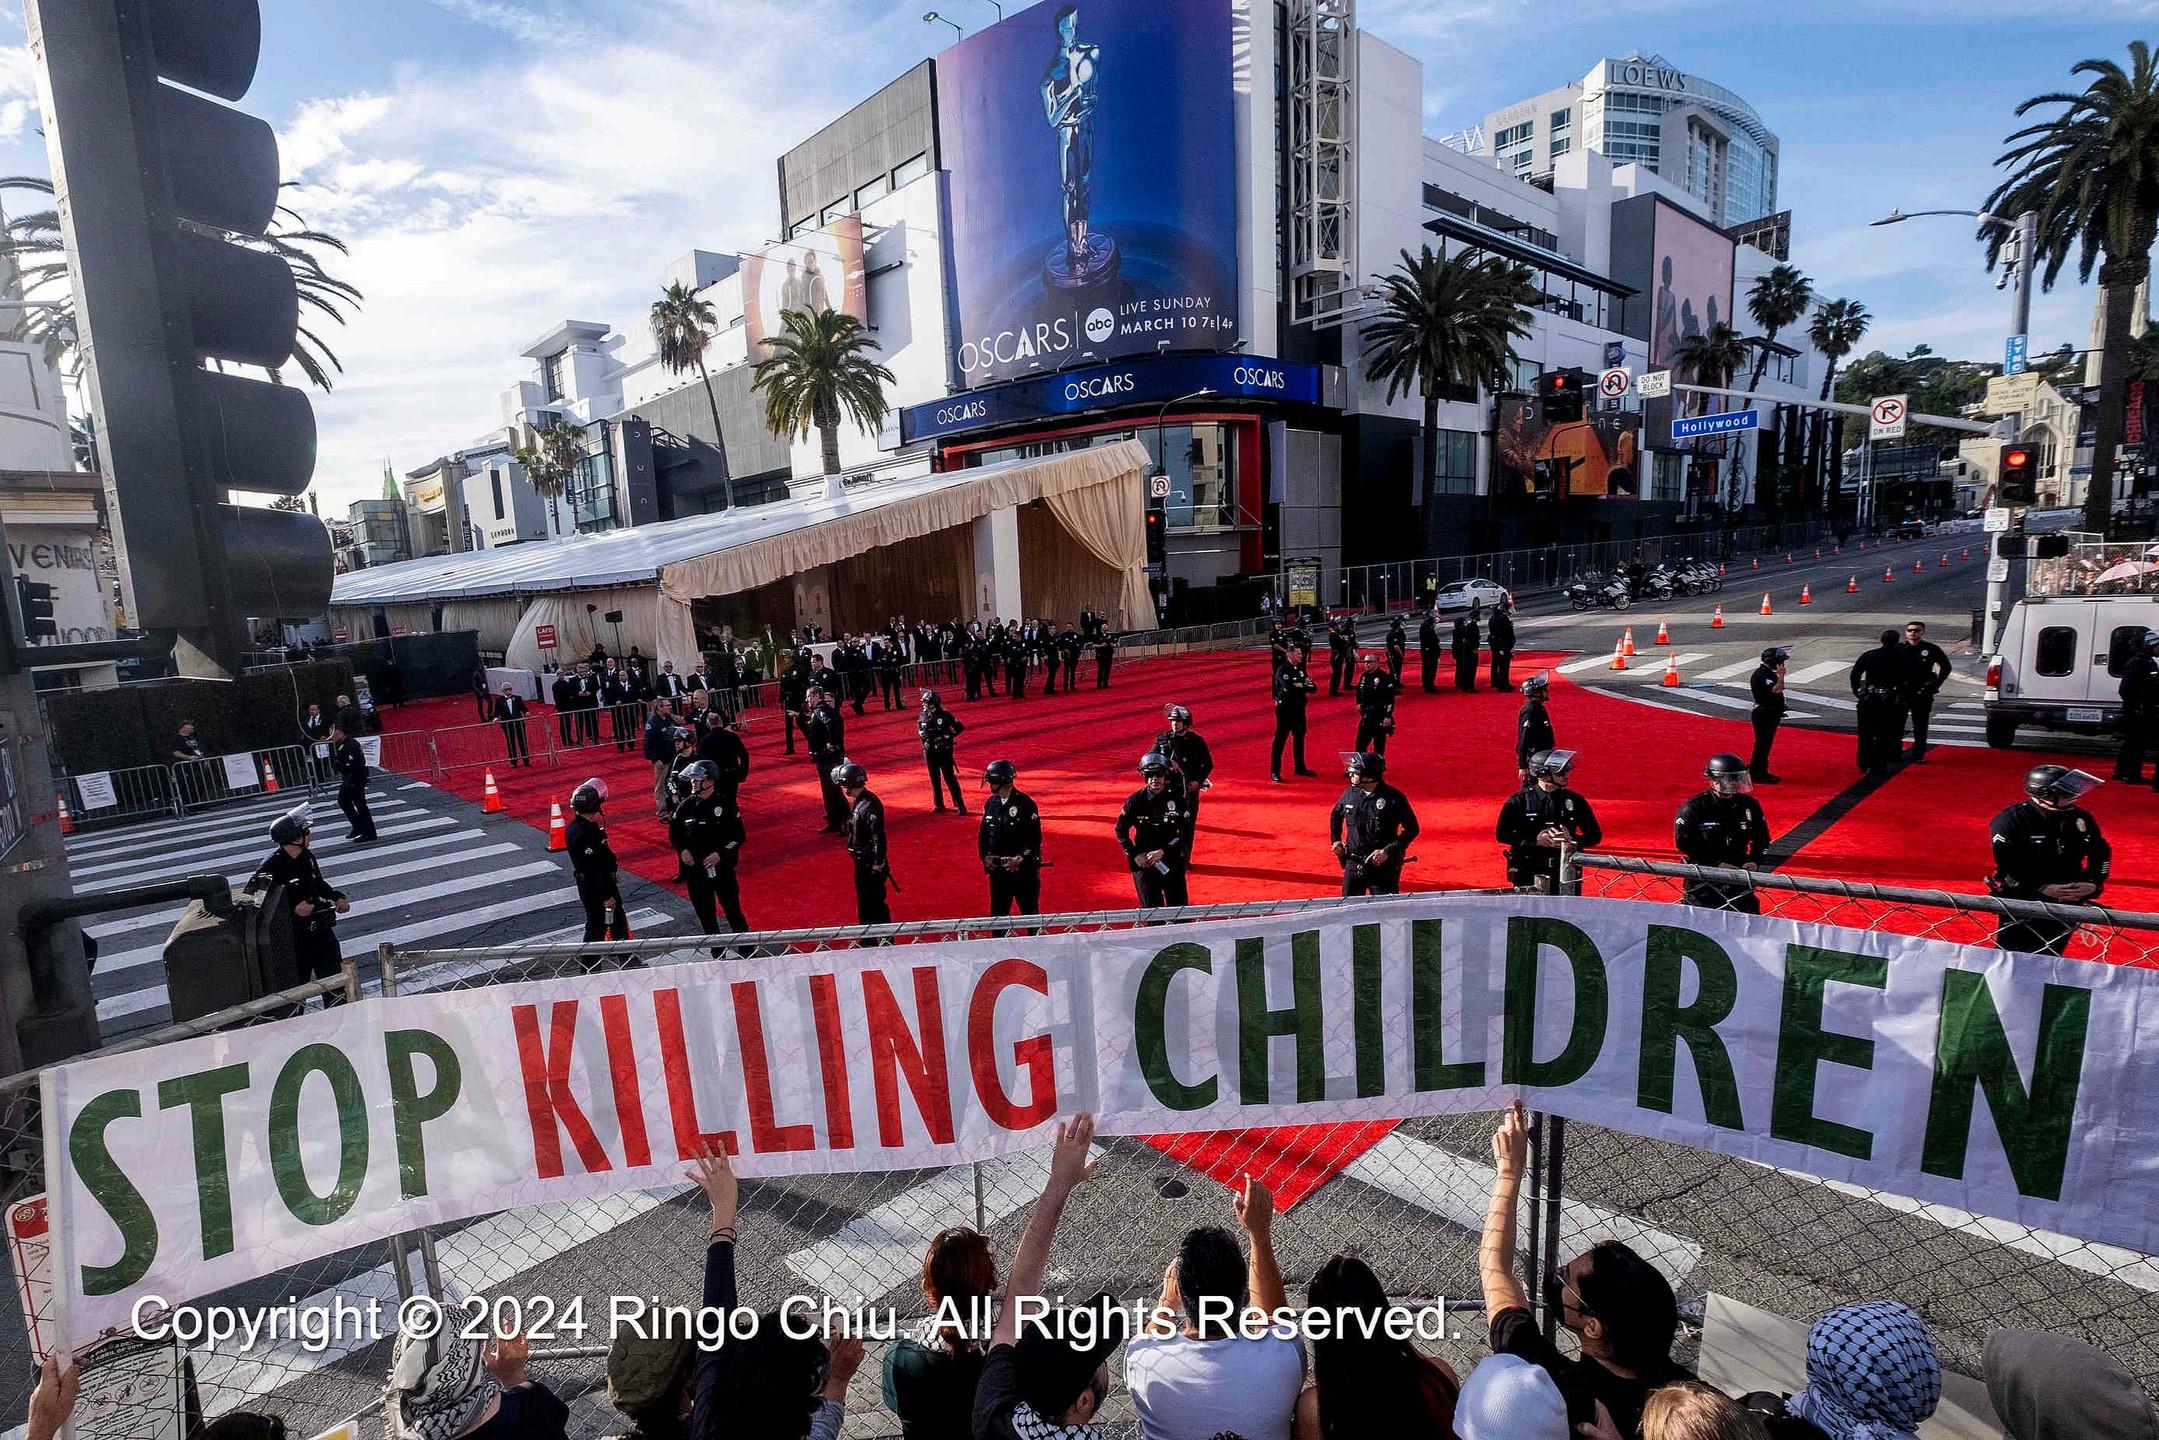 Stop Killing Children banner across the street from the Academy Awards